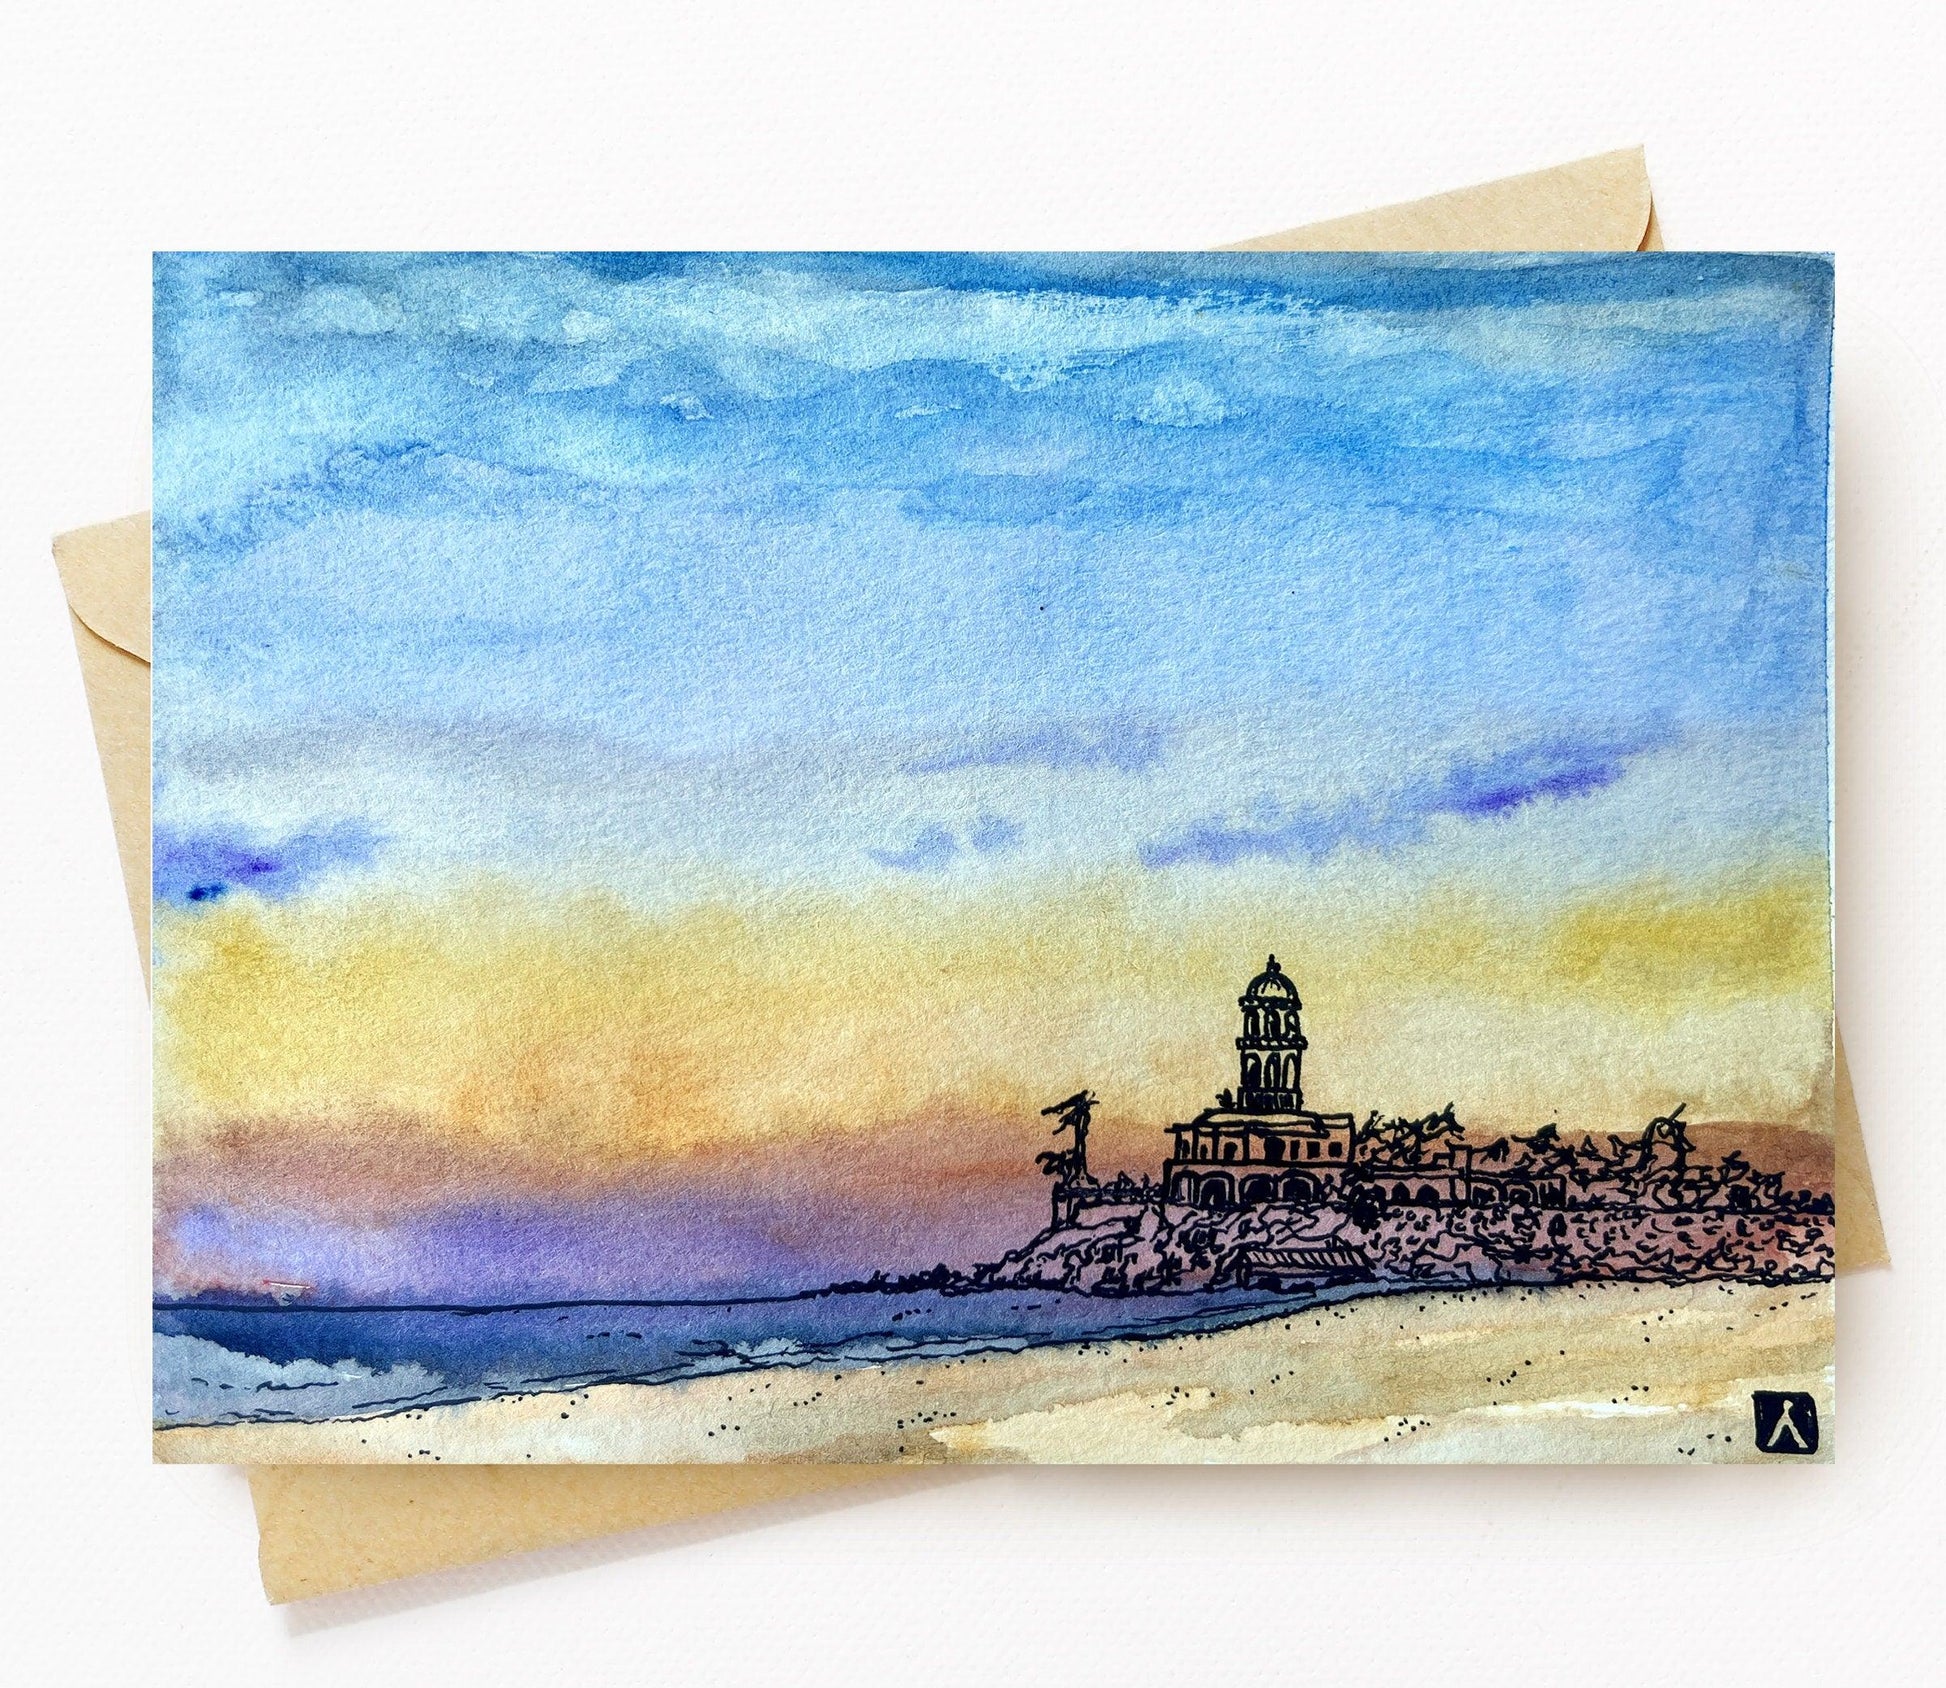 BellavanceInk: Greeting Card With Watercolor Of A Beach View At Cerritos Surf Town Beach in Baja Mexico 5 x 7 Inches - BellavanceInk